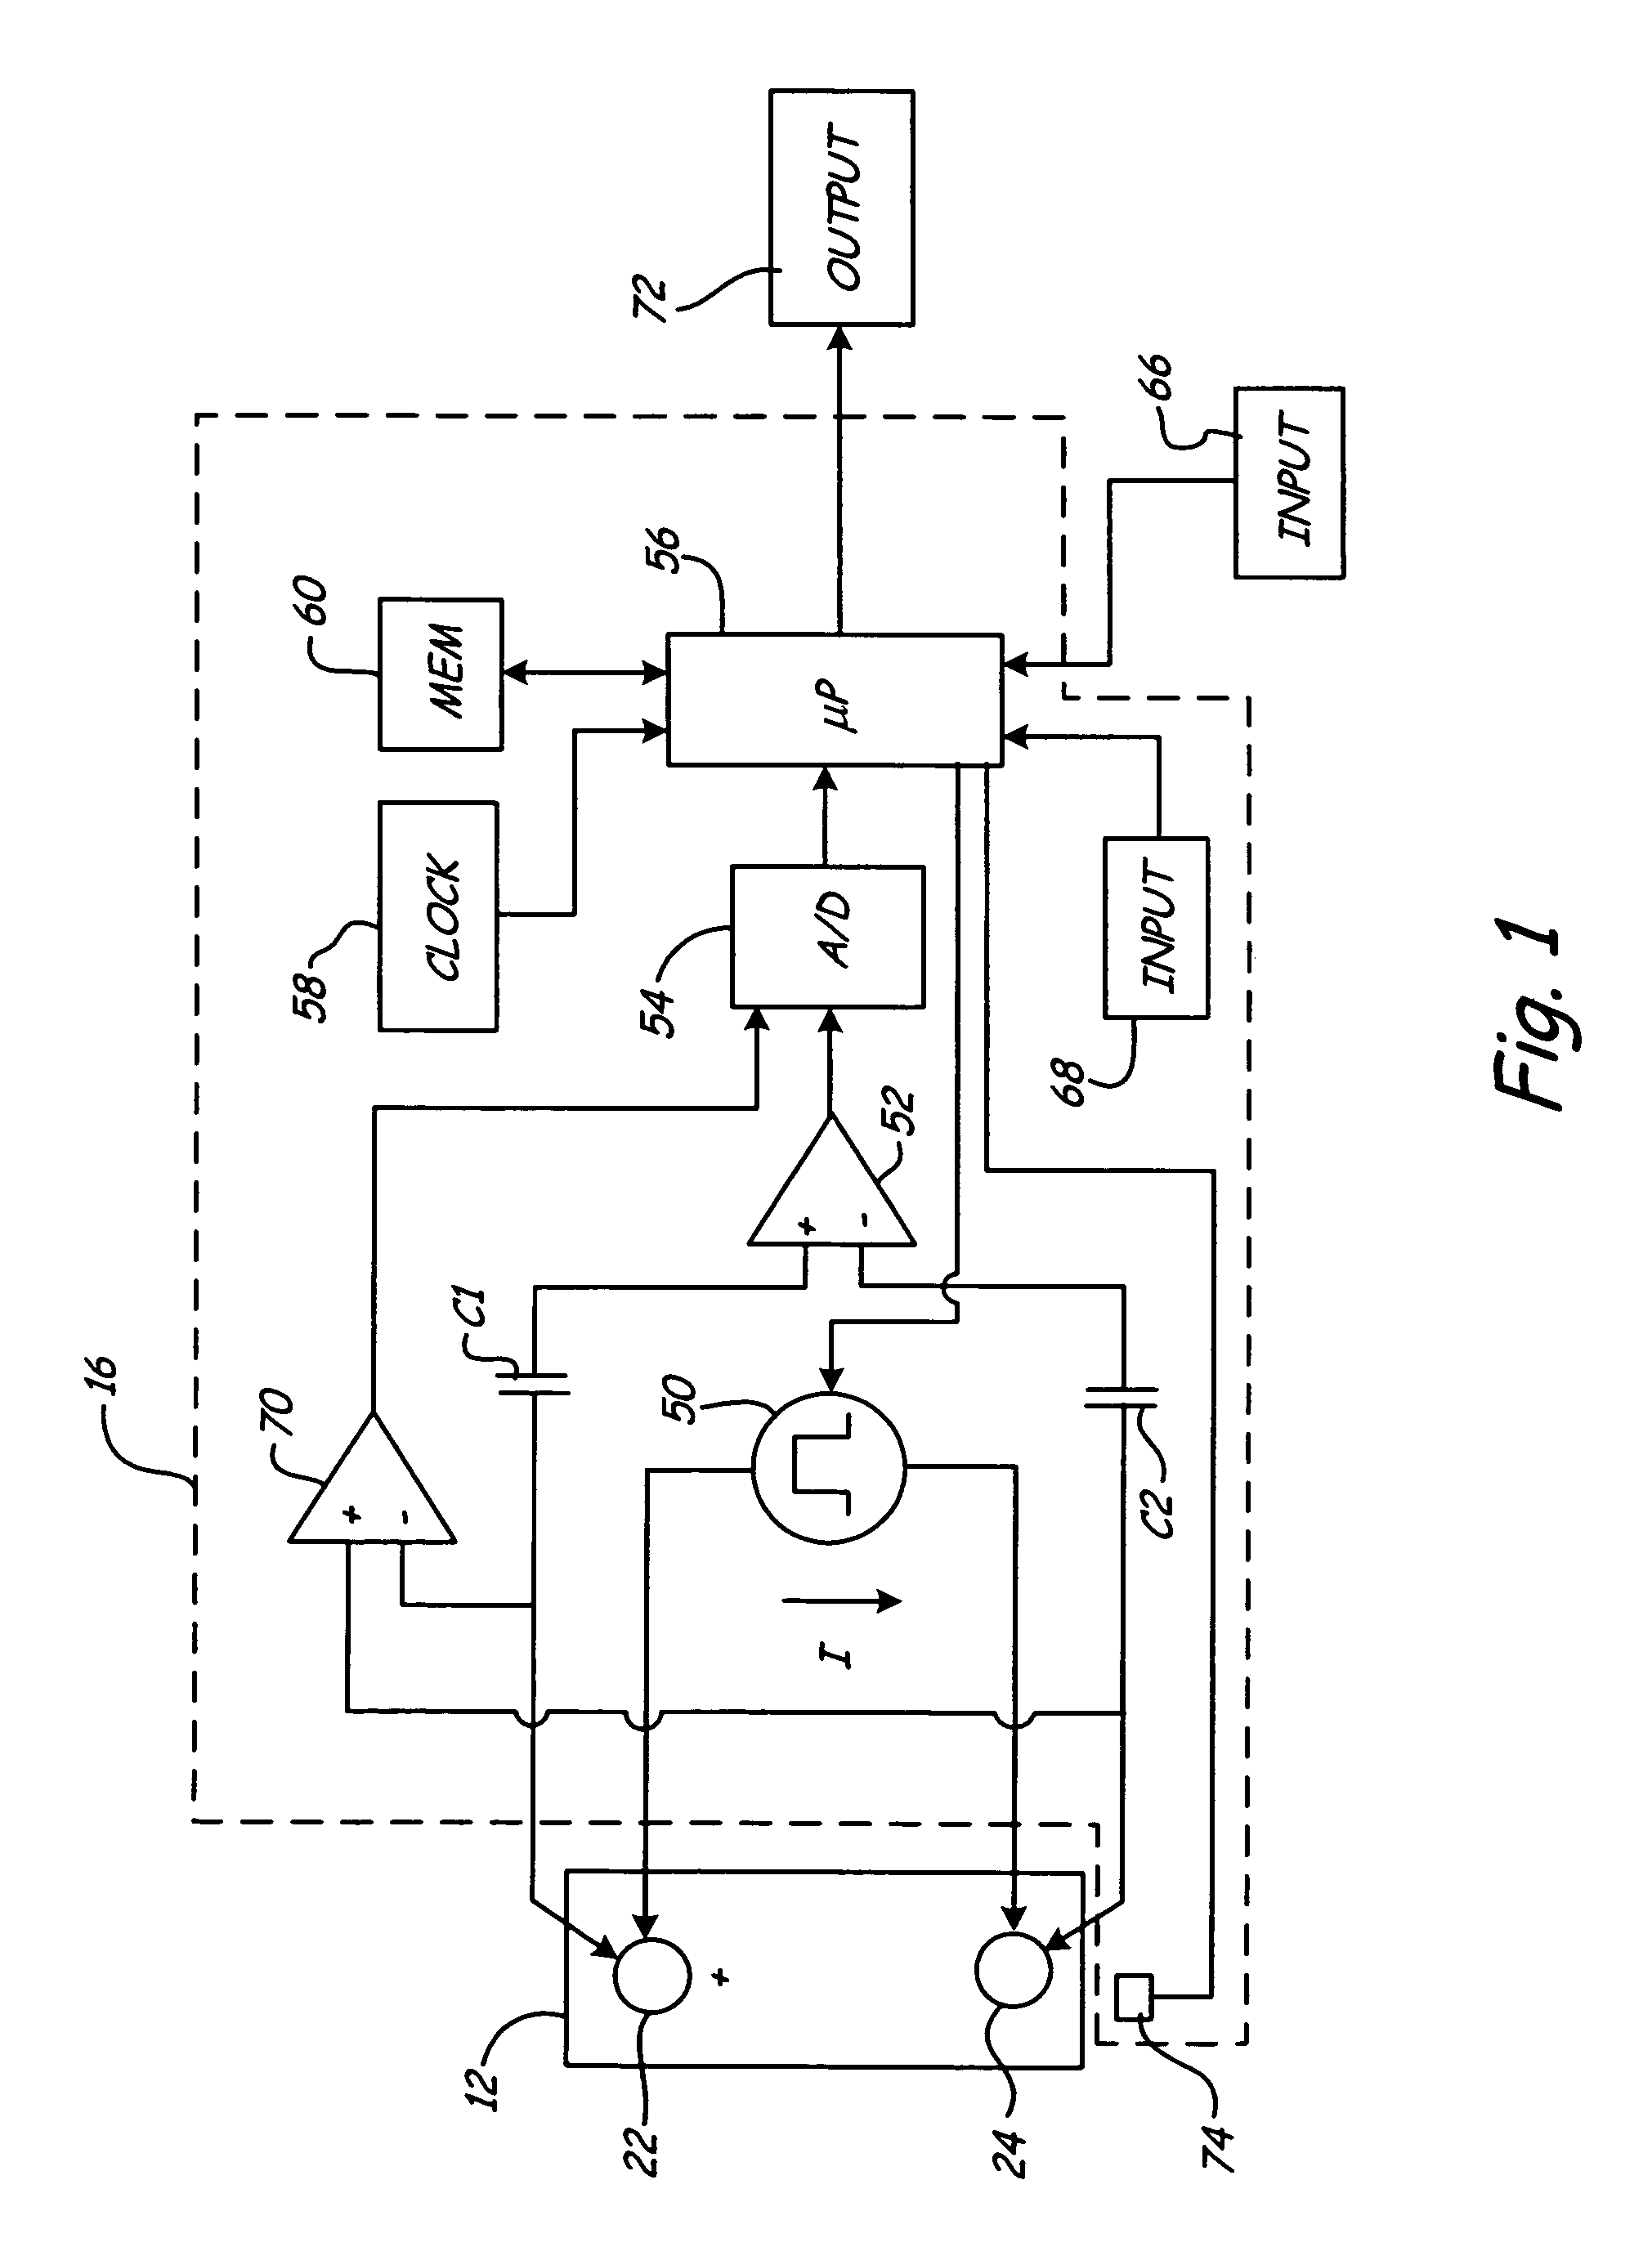 Apparatus and method for simulating a battery tester with a fixed resistance load